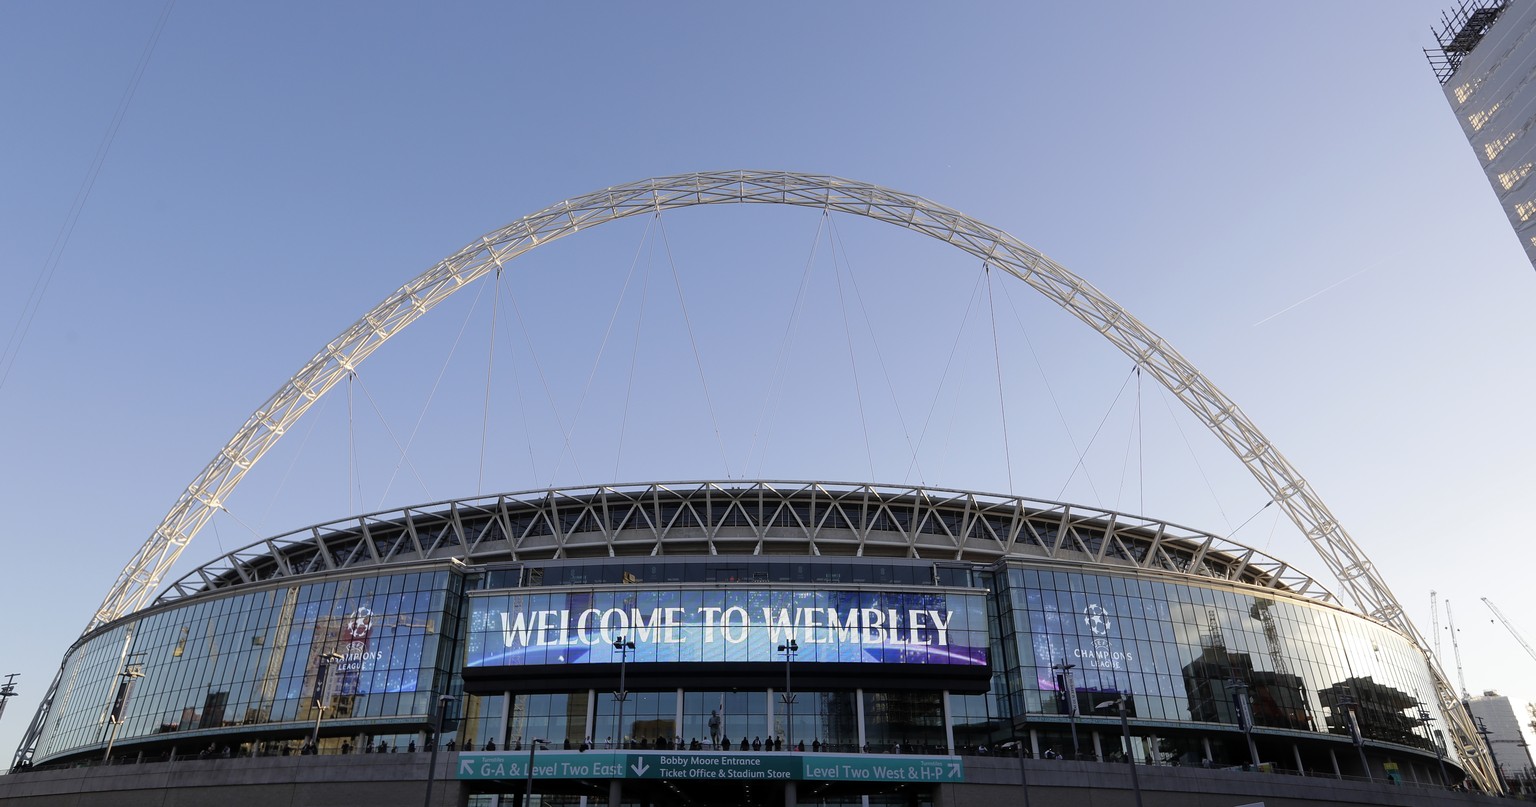 FILE In this Wednesday, Oct. 3, 2018 file photo, a view of the exterior of Wembley Stadium in London. With coronavirus restrictions eased to allow fans back into stadiums, there at least will be some  ...